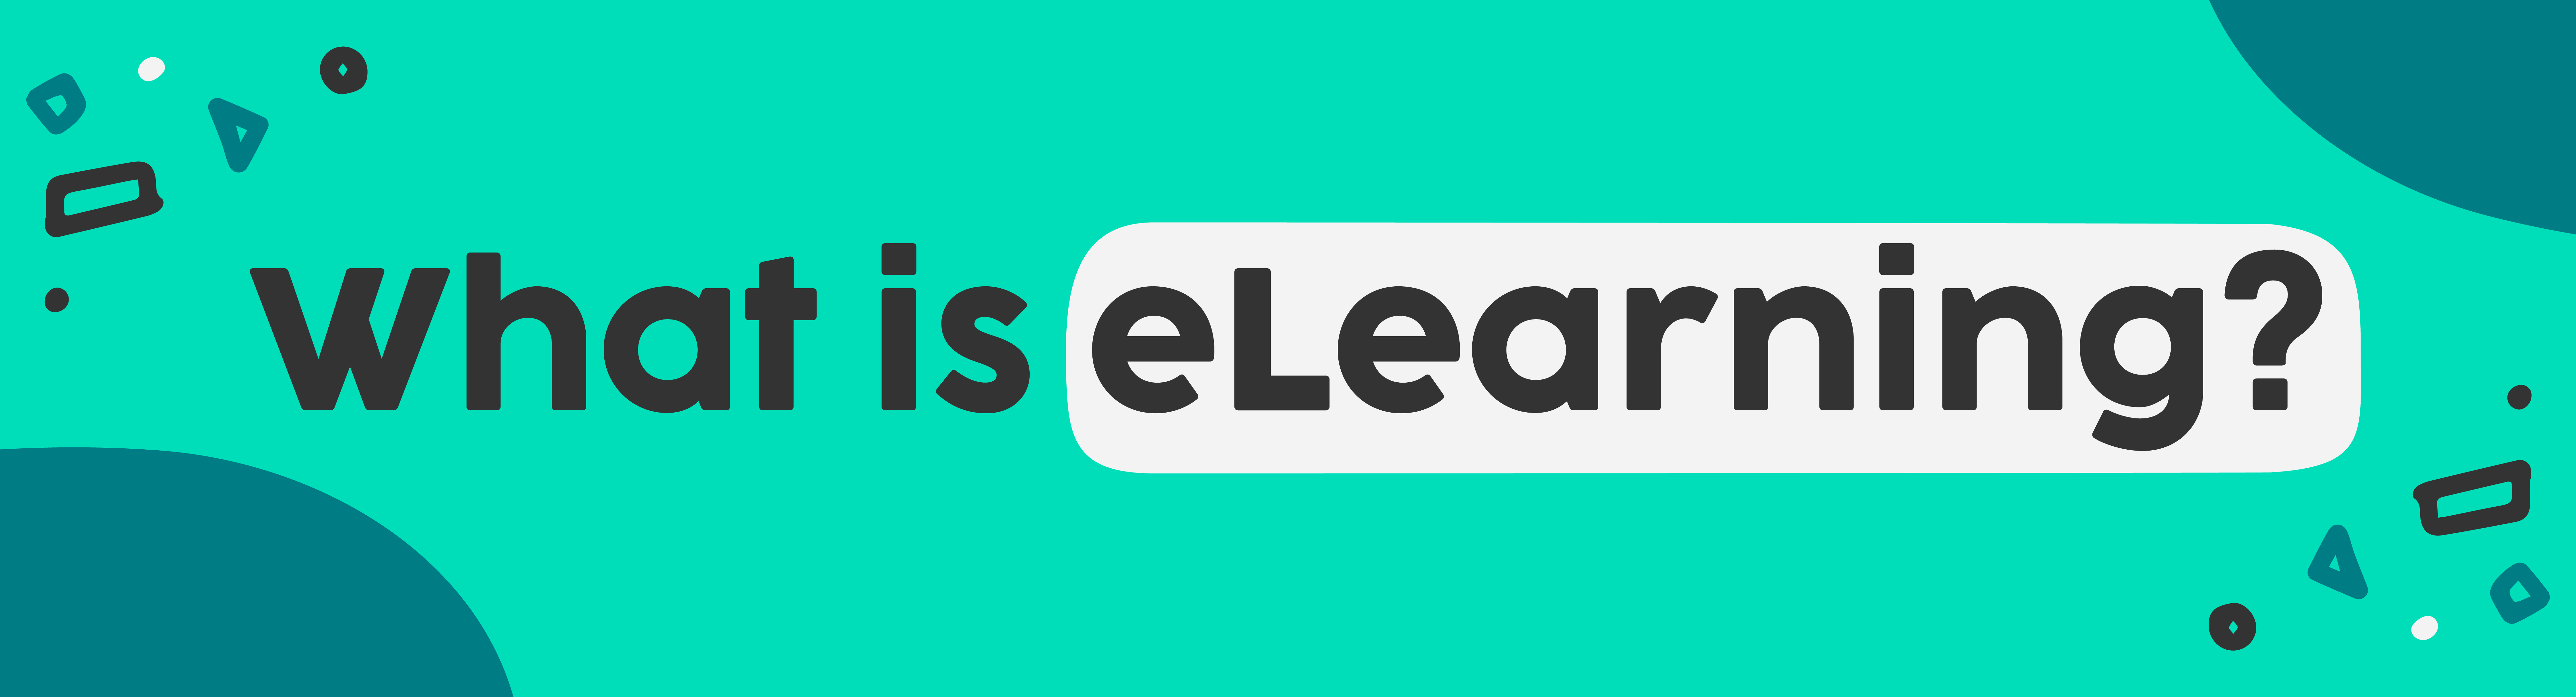 What is eLearning?